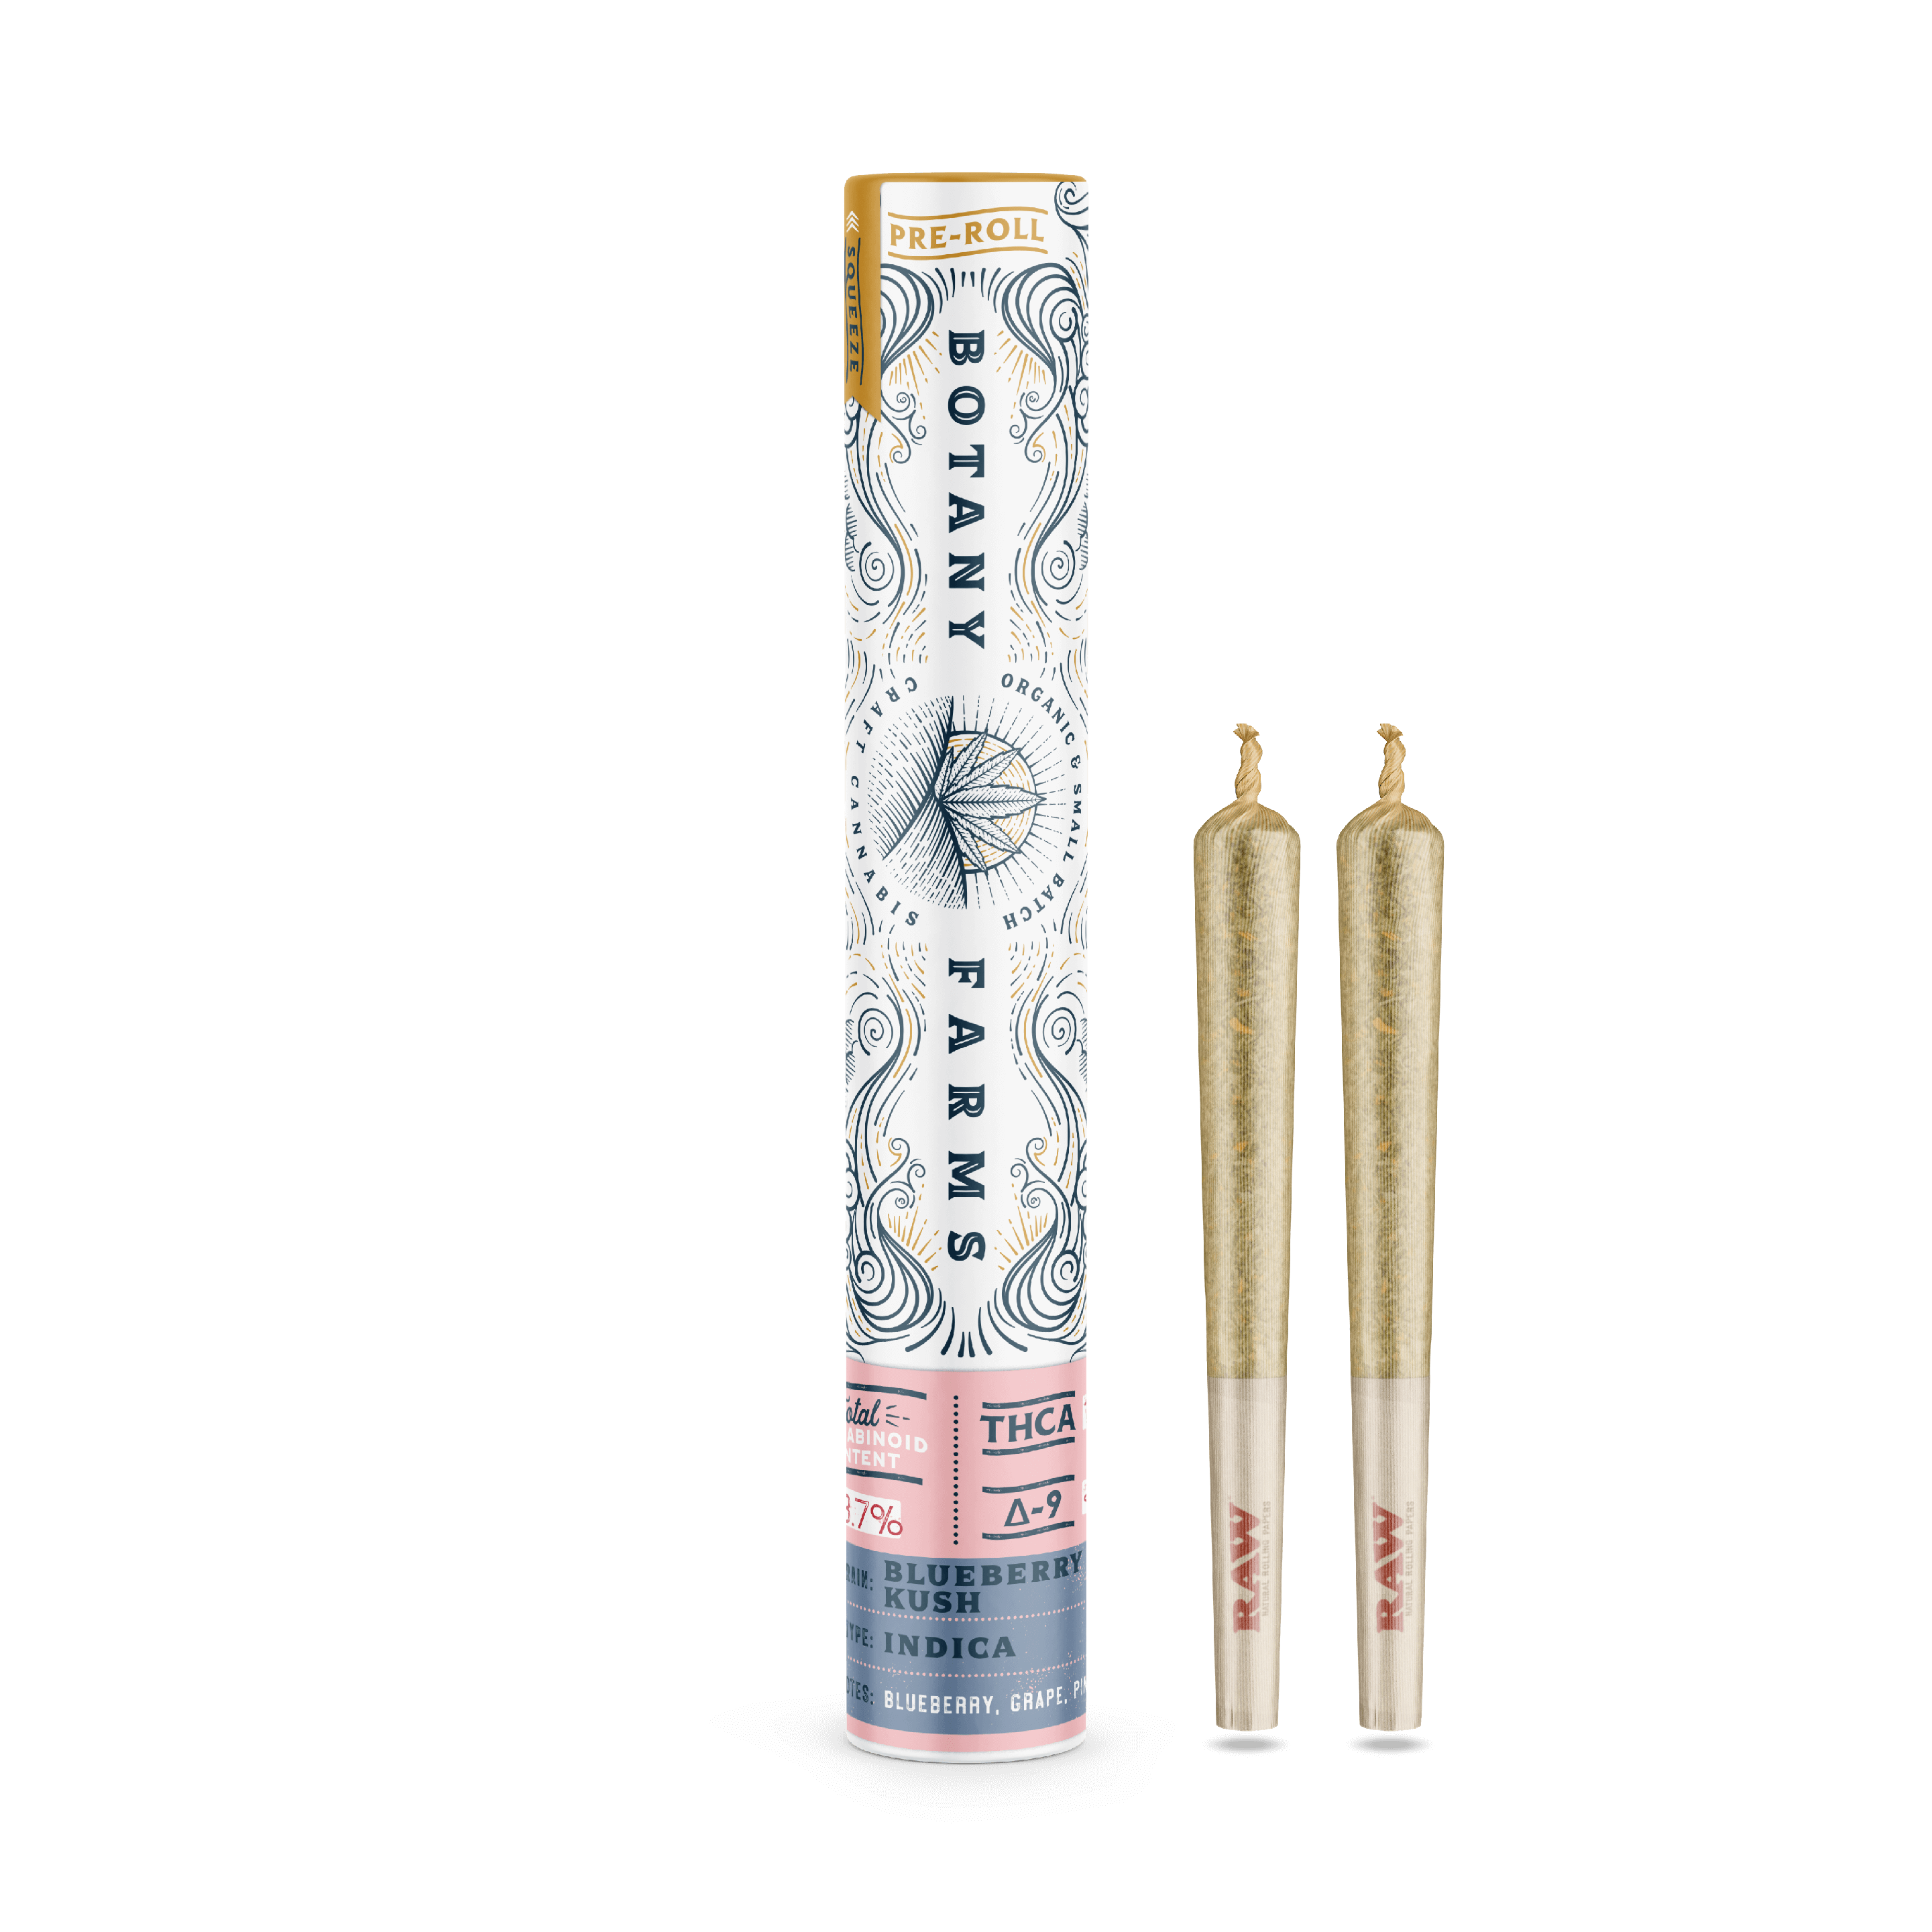 THCA Blueberry Kush Pre-Roll (2 Half Grams) from Botany Farms